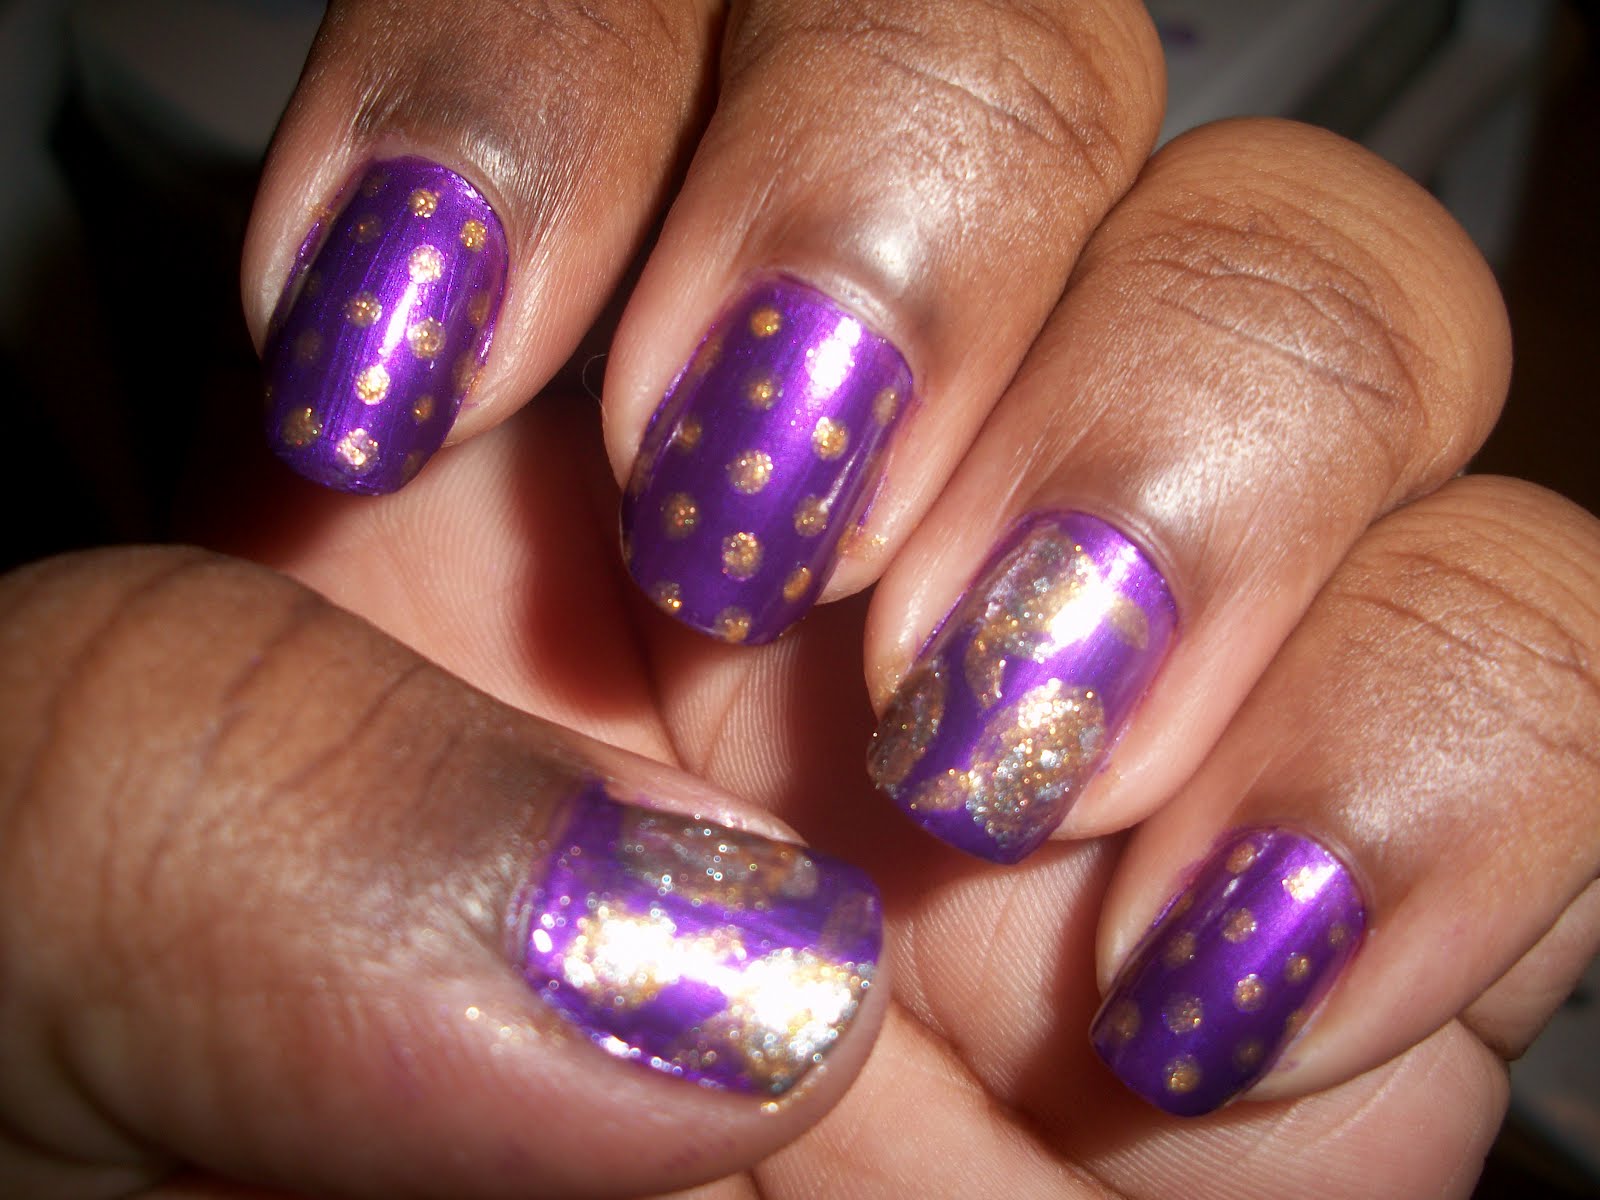 Indian Acrylic Nail Designs - wide 7